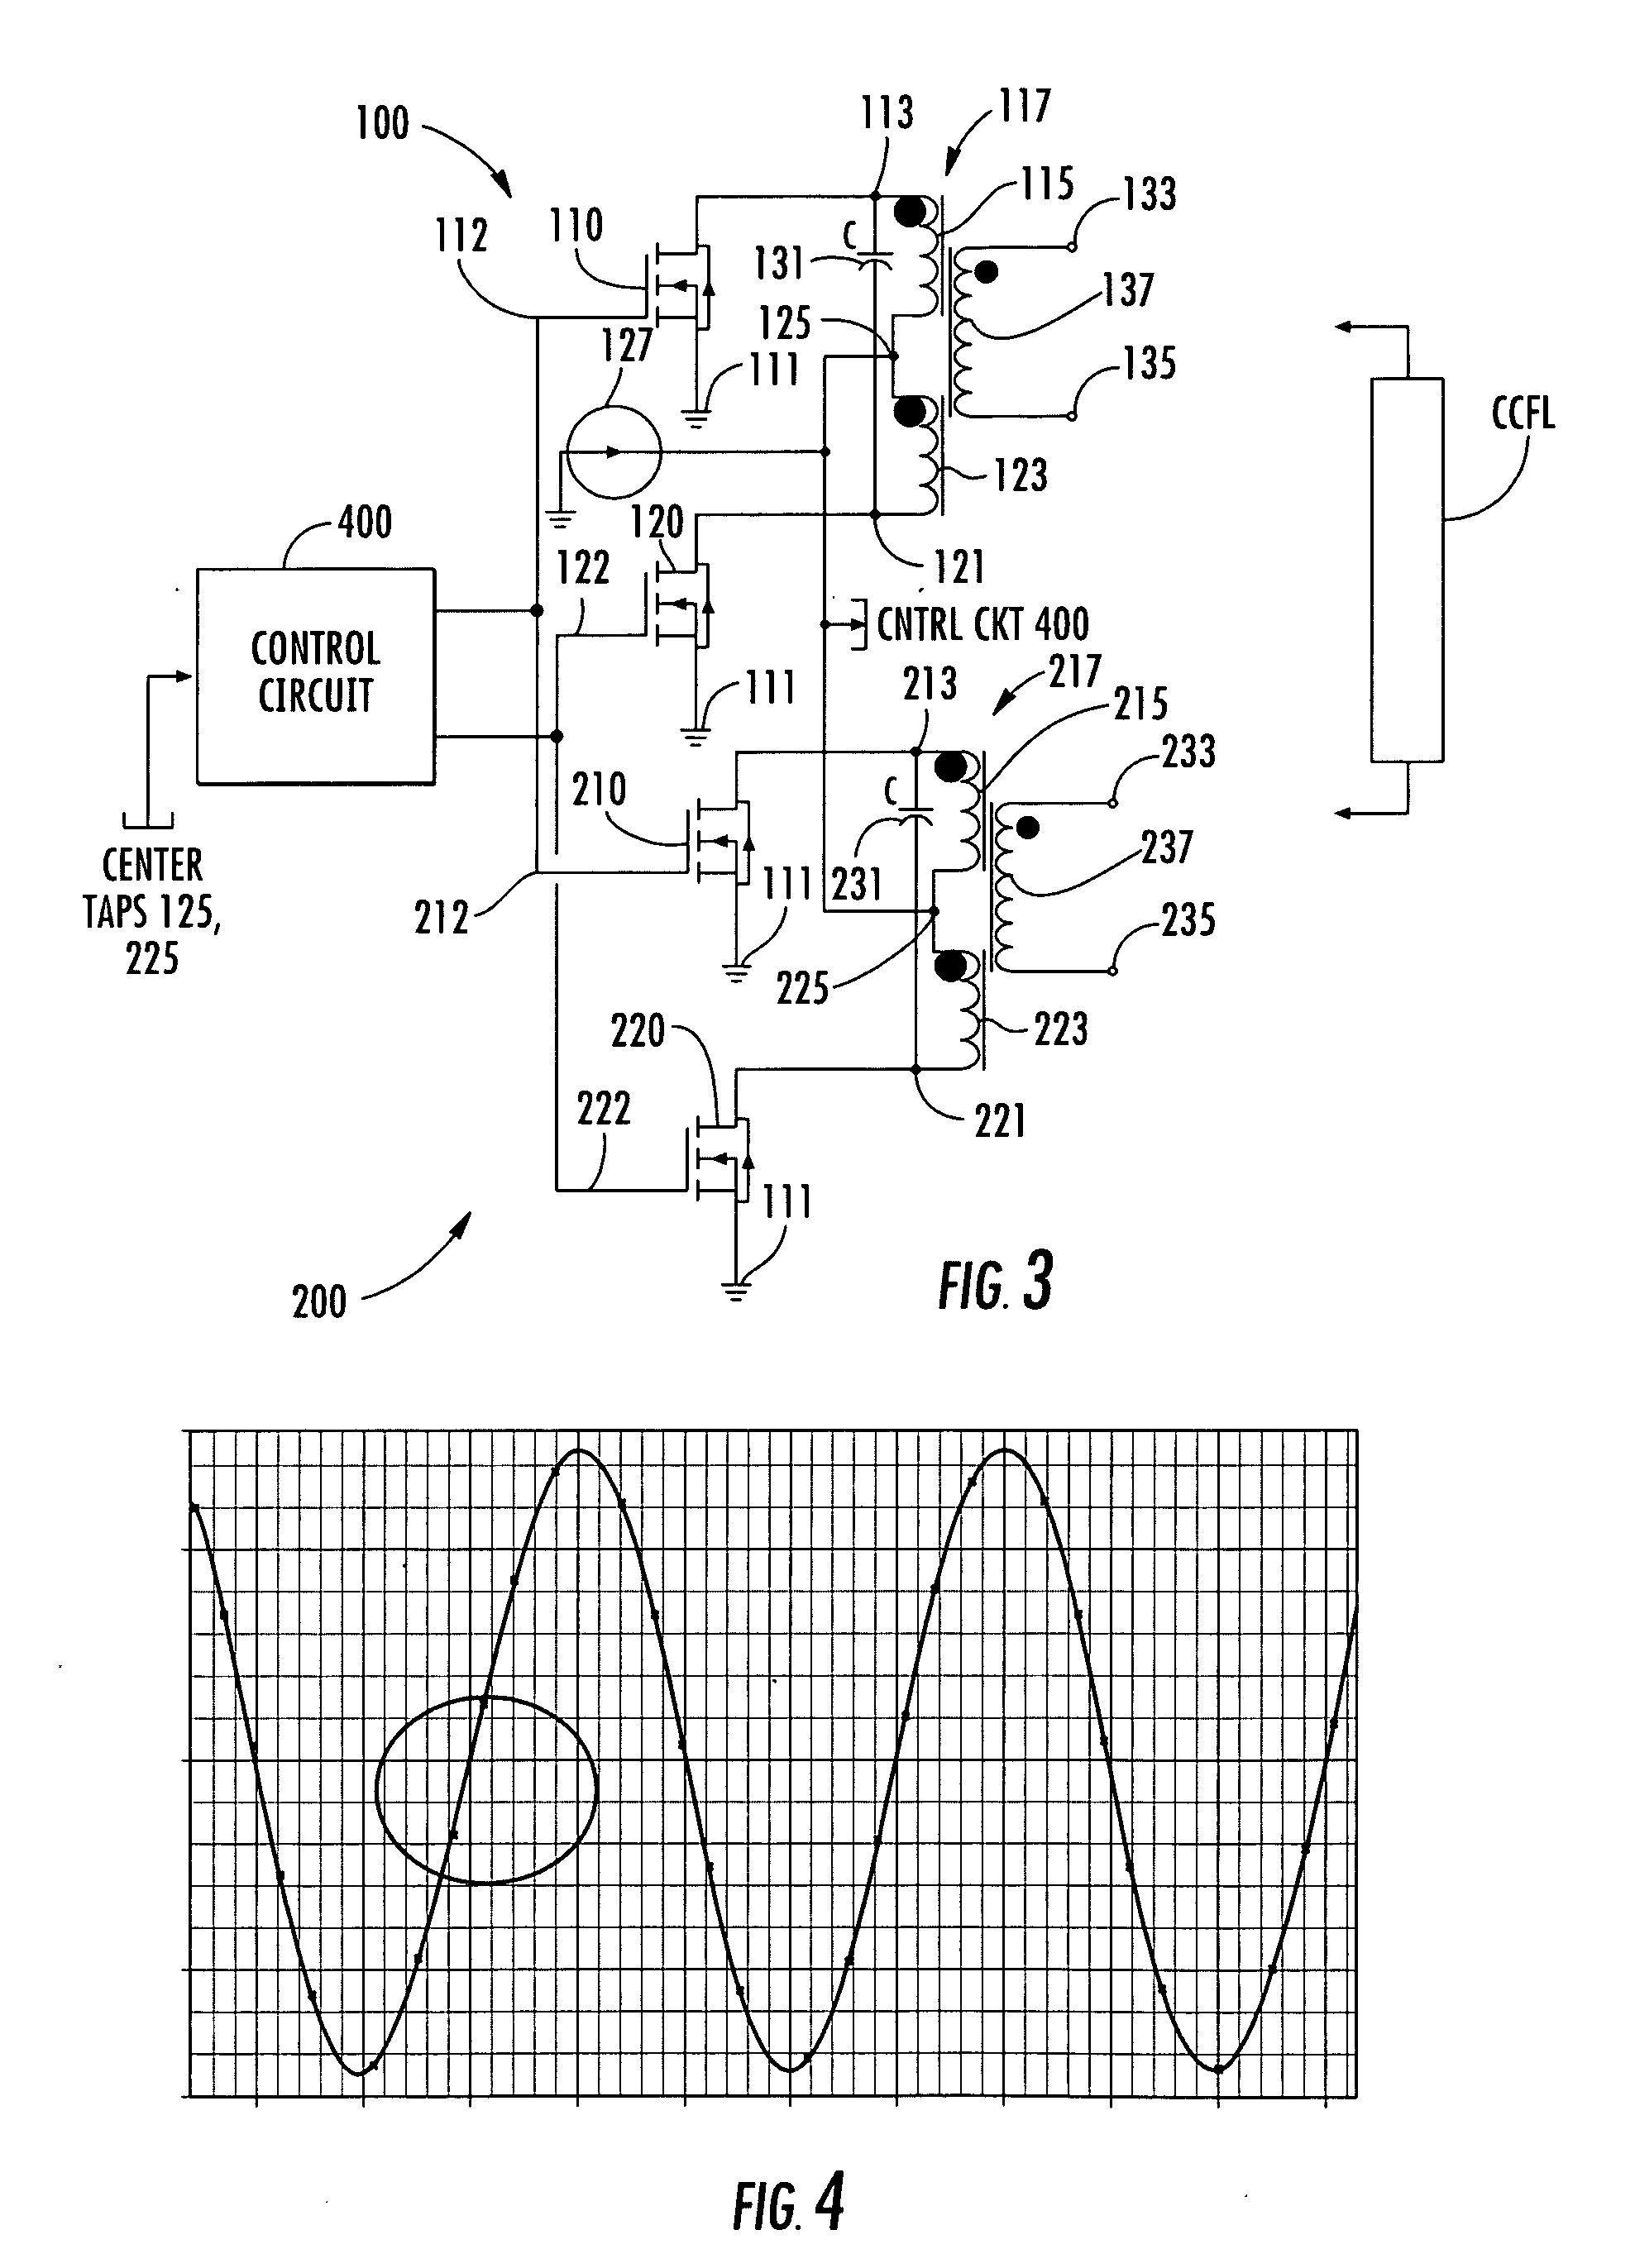 Architecture for achieving resonant circuit synchronization of multiple zero voltage switched push-pull DC-ac converters